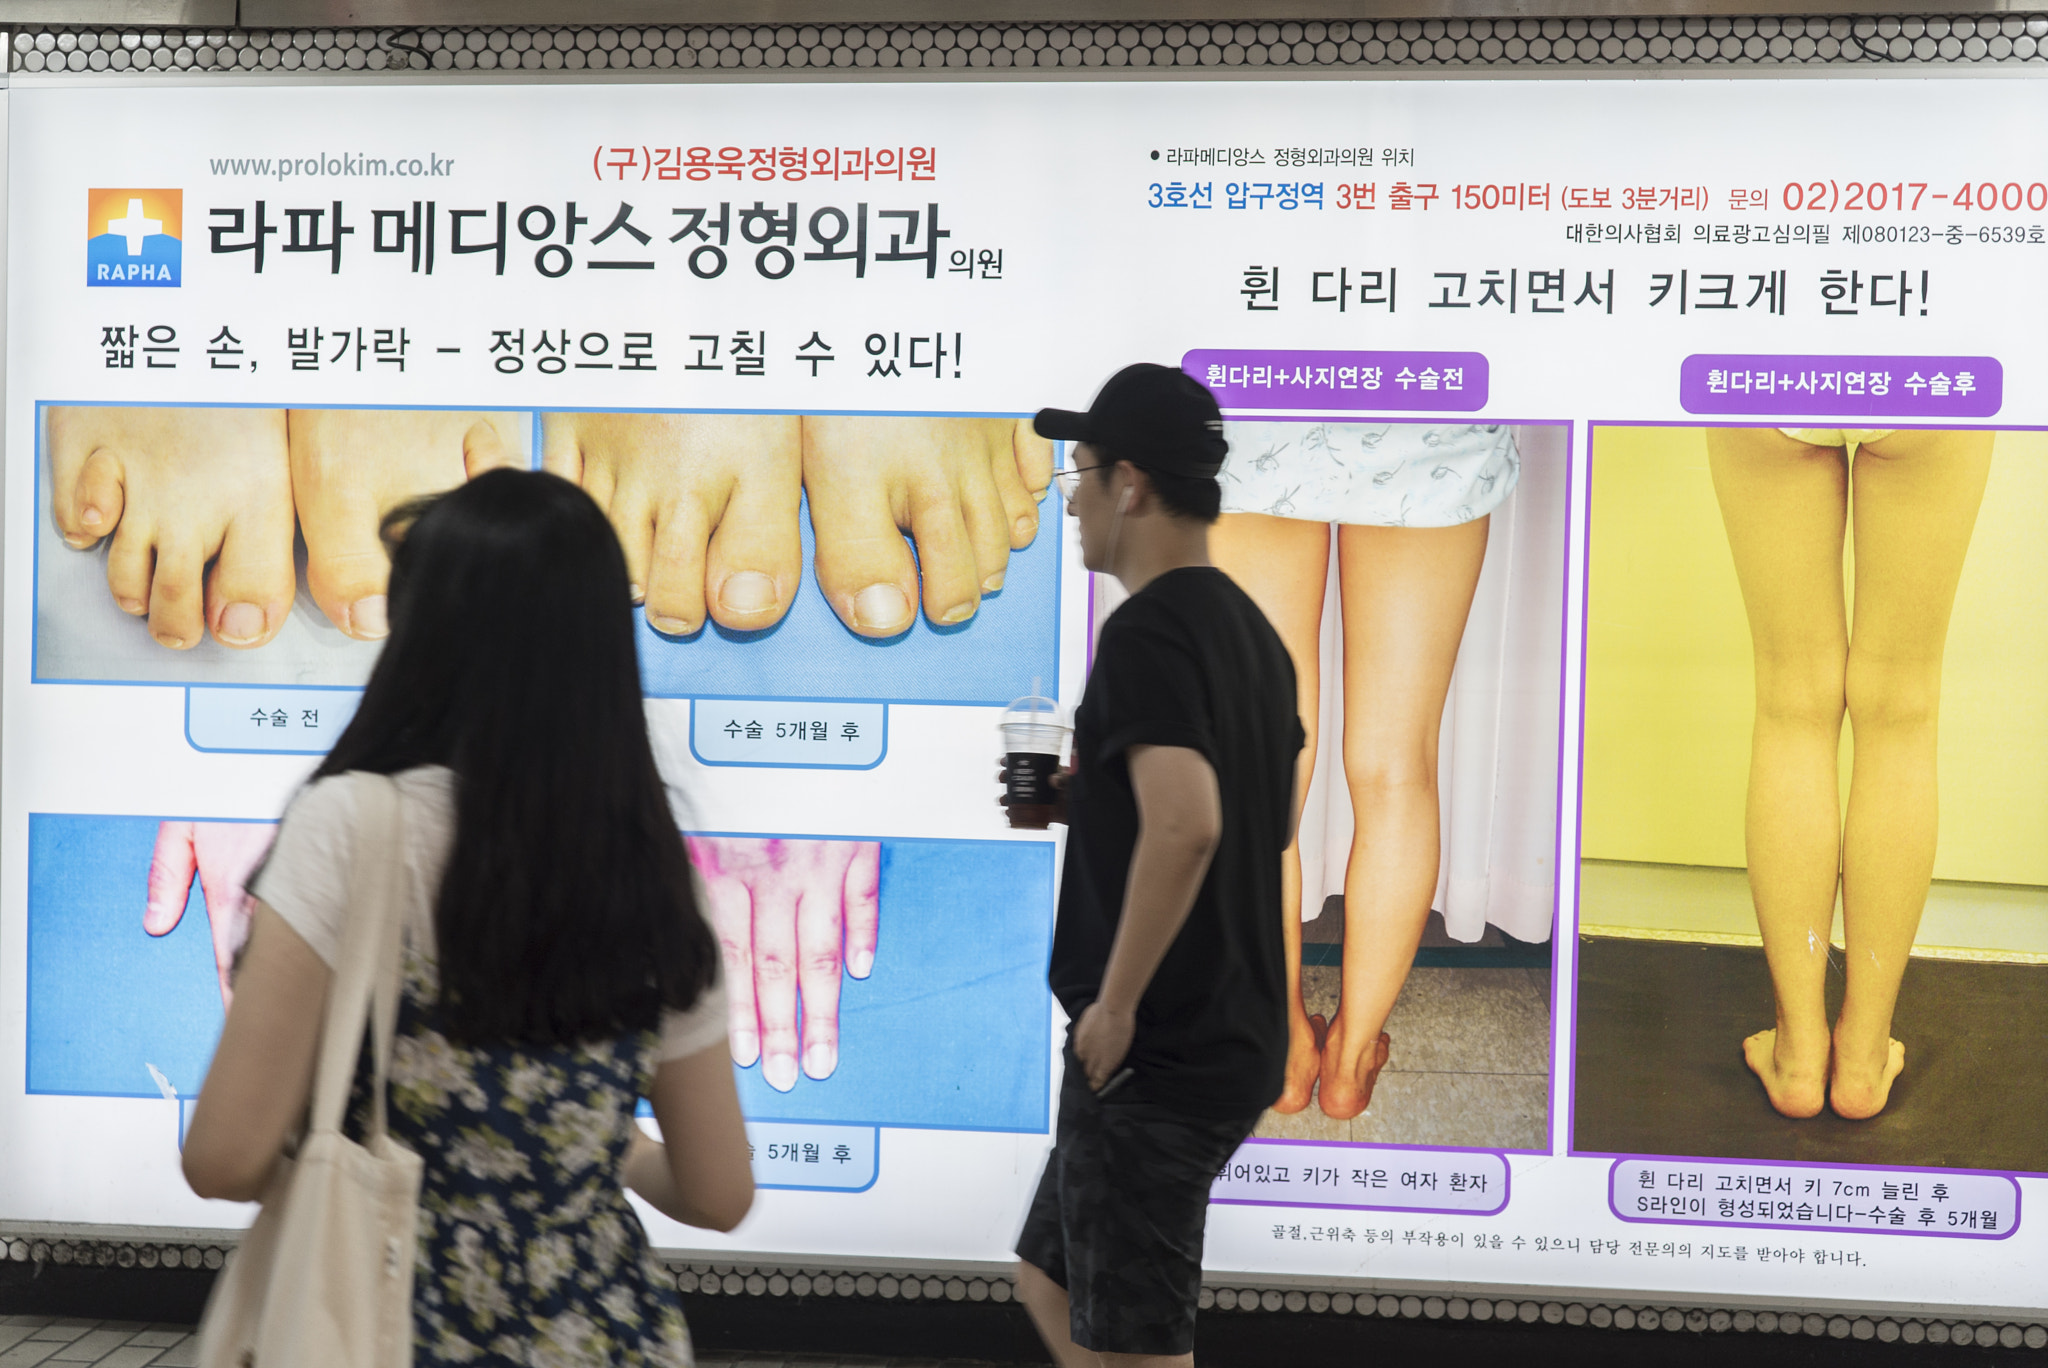 Sony a7S sample photo. Plastic surgery ads in south korea photography